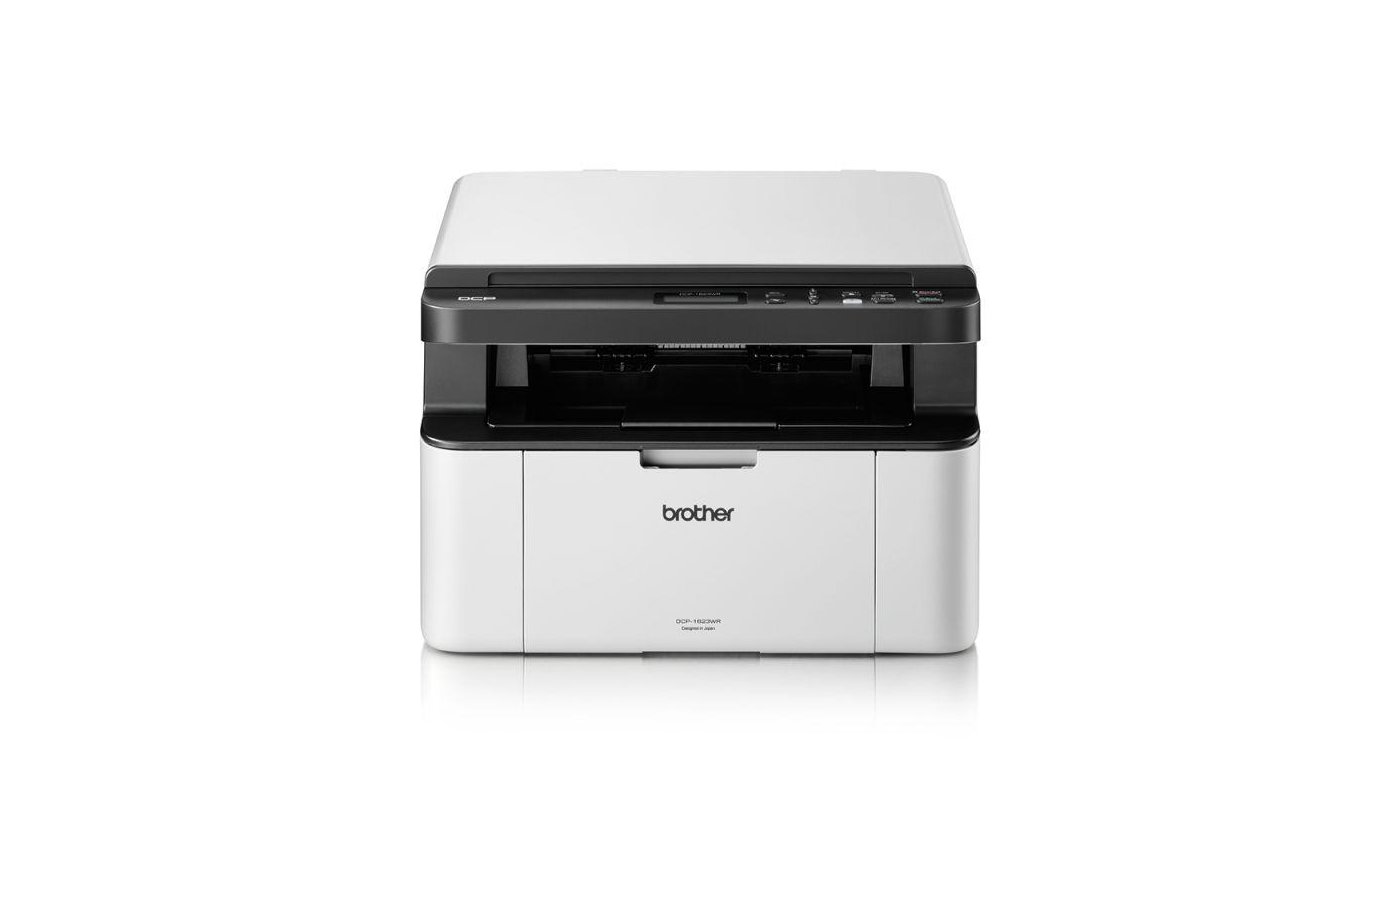 Brother DCP 1510e. МФУ brother DCP-1610wr. МФУ brother mfcj3530dwr1. МФУ brother DCP-1510e. Brother dcp 1623wr